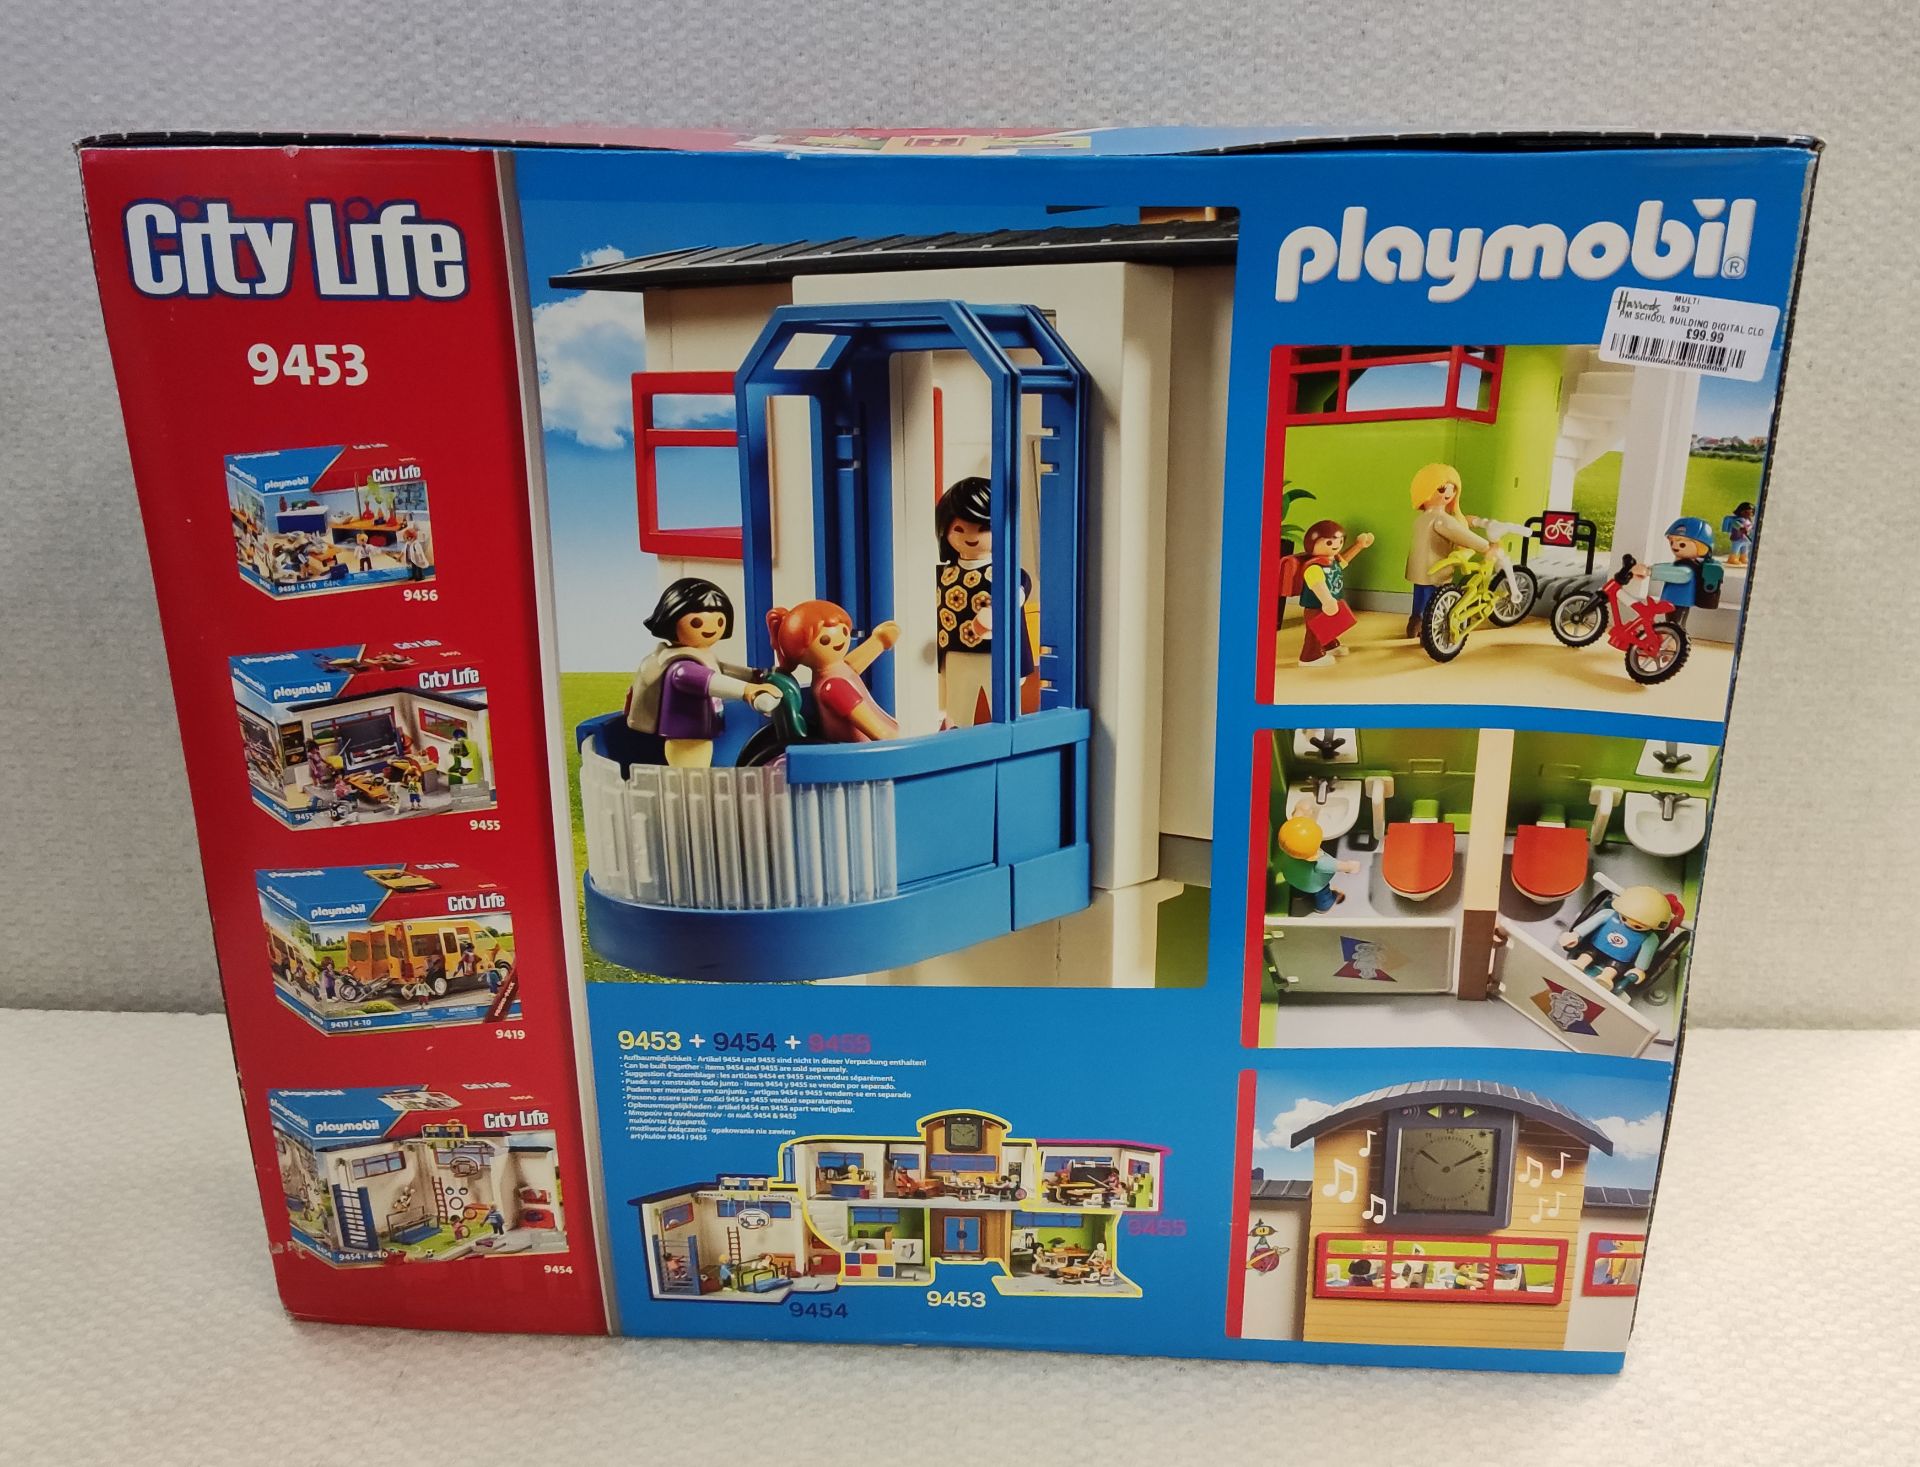 1 x Playmobil City Life School Building With Furnishings - Model 9453 - New/Boxed - Image 3 of 5